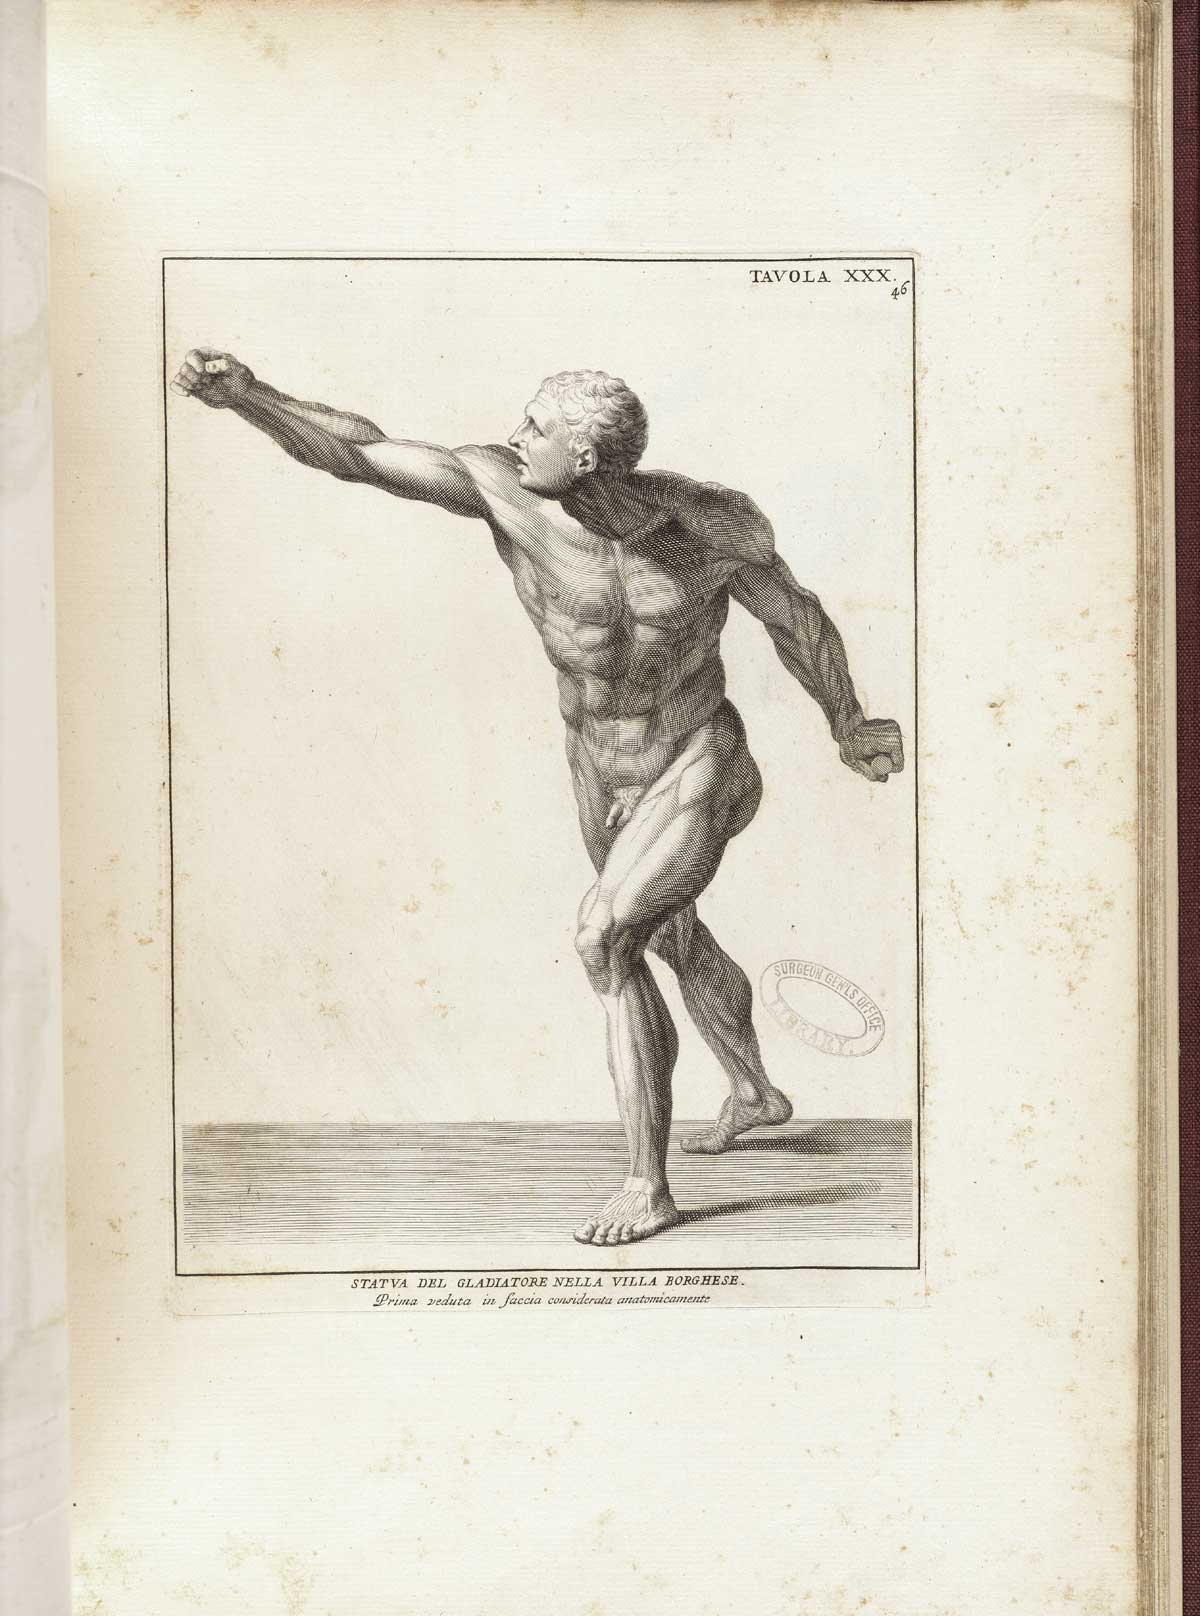 Engraving of the statue the Borghese Gladiator, a nude male figure lunging forward with his right hand raised as if with a sword to fight an opponent on horseback; the figure’s chest and torso are facing the viewer, but the actor faces his opponent to the left of the page; from Bernardino Genga’s Anatomia per uso et intelligenza del disegno, NLM Call no.: WZ 250 G329an 1691.